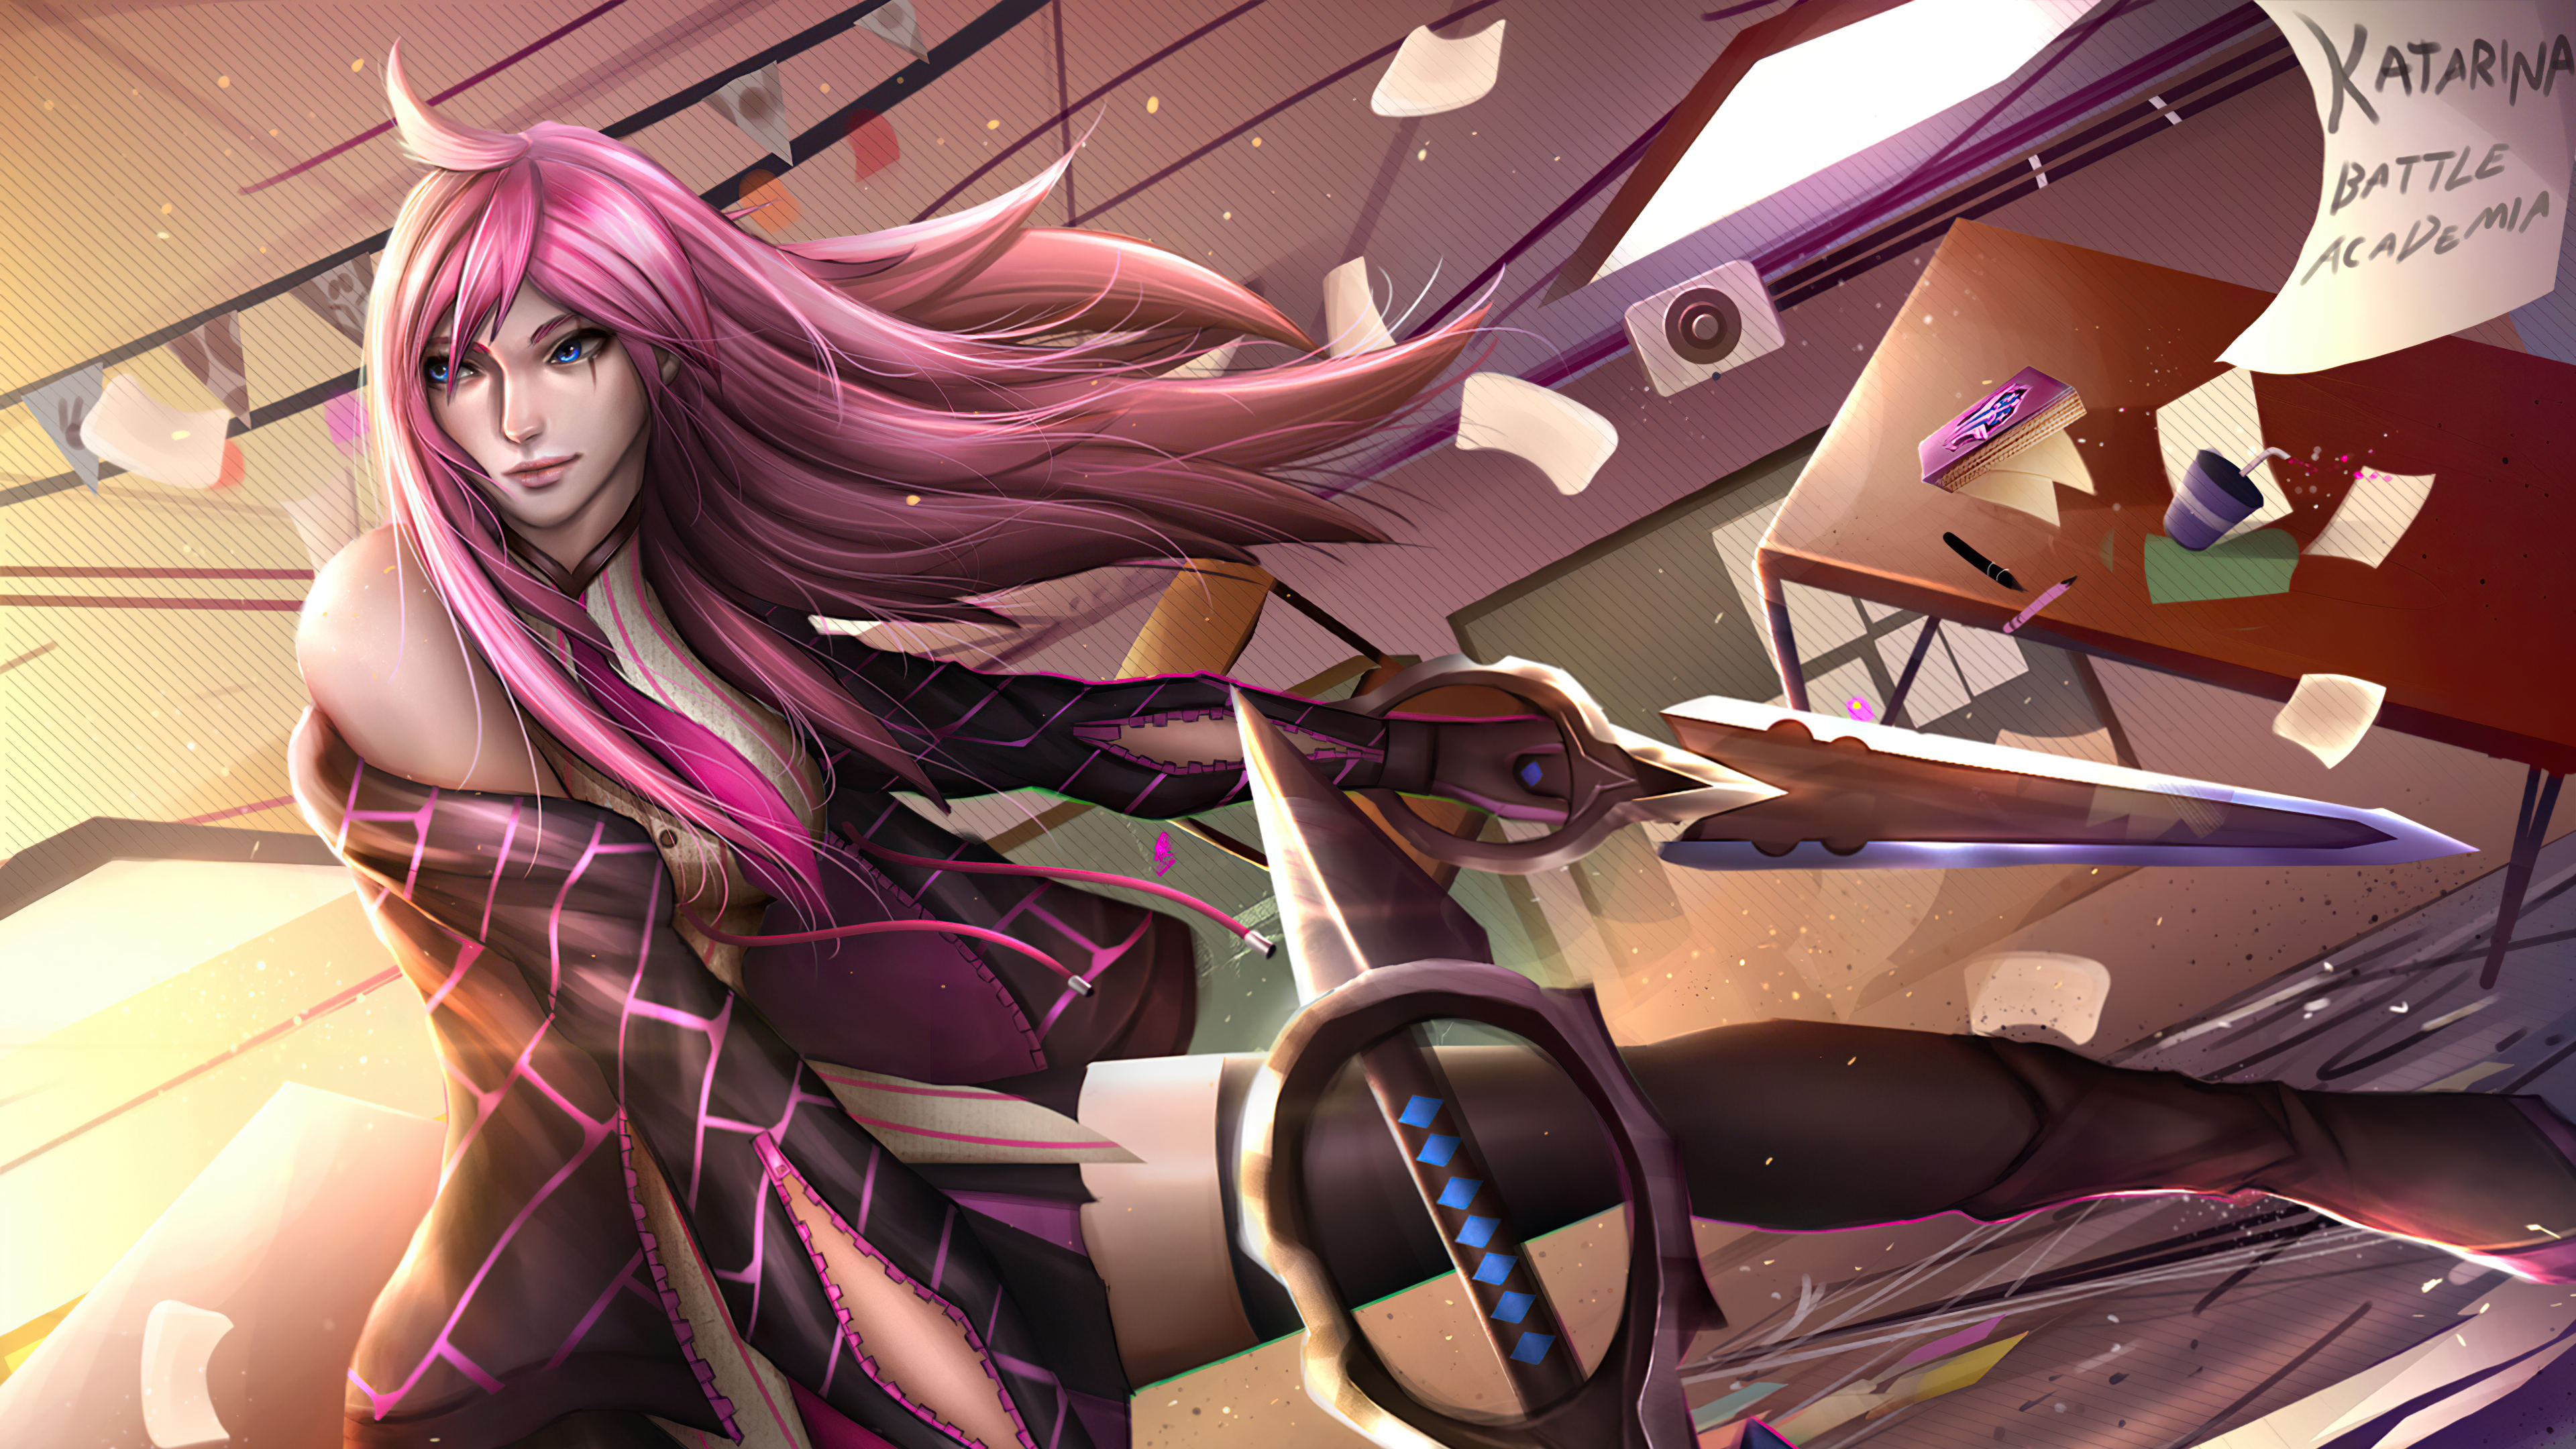 Katarina Battle Academia League Of Legends 4k, HD Games, 4k Wallpapers,  Images, Backgrounds, Photos and Pictures